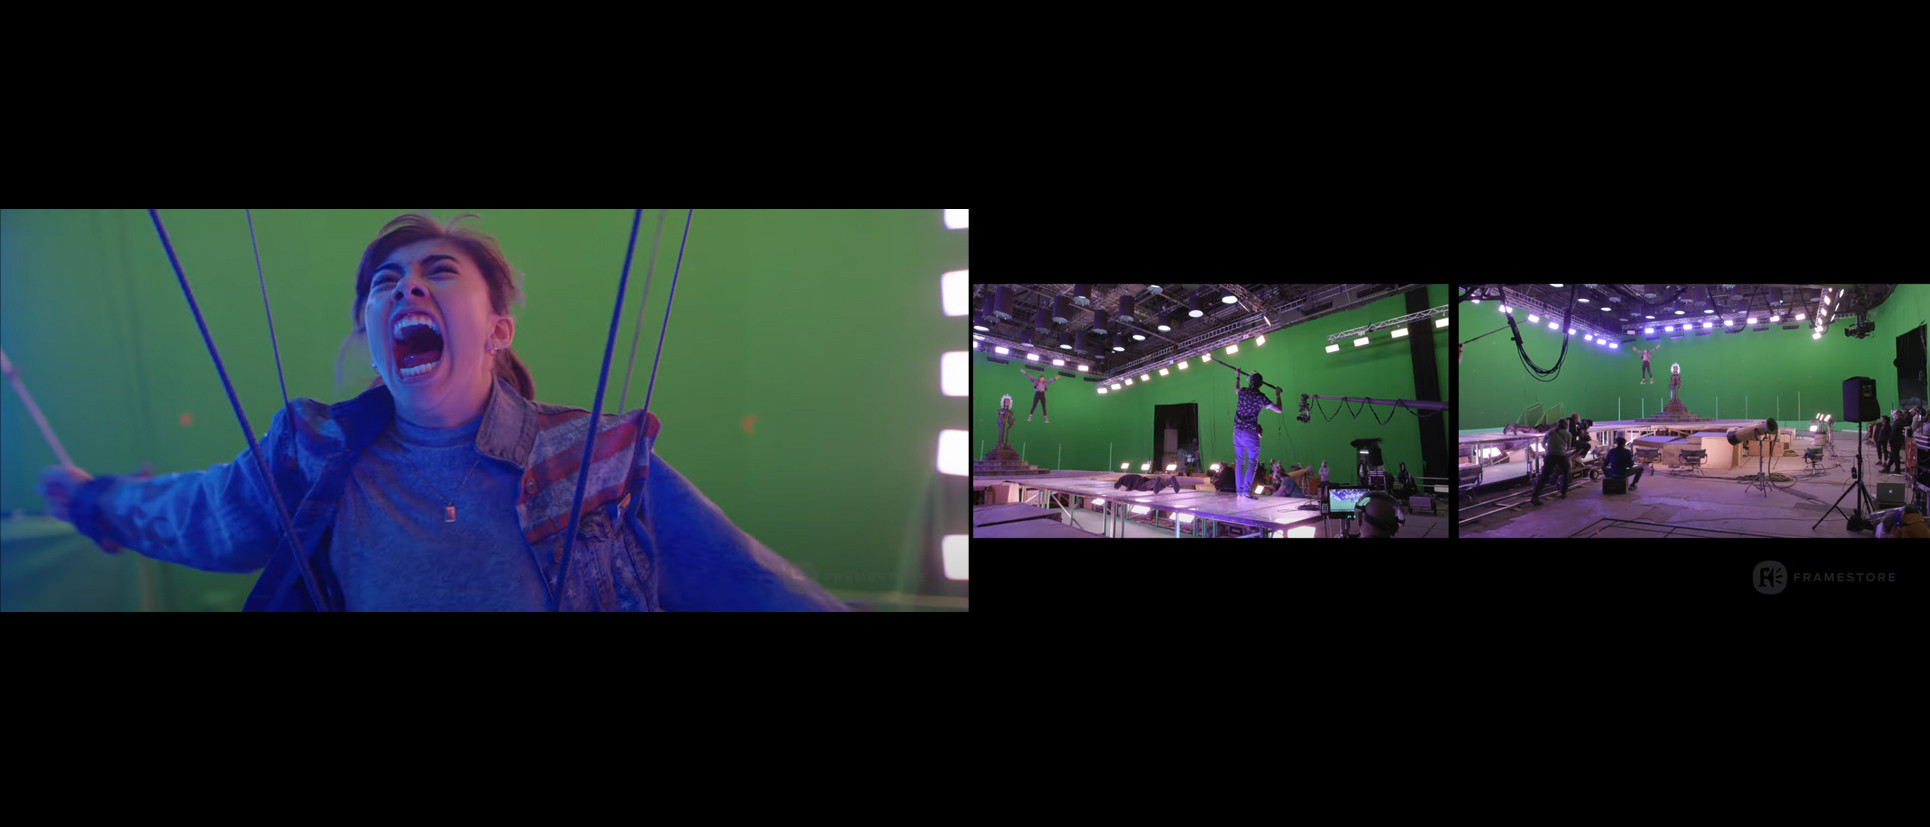 On-set use of the color palette we provided on the last concept(previous frame) sent to the production.